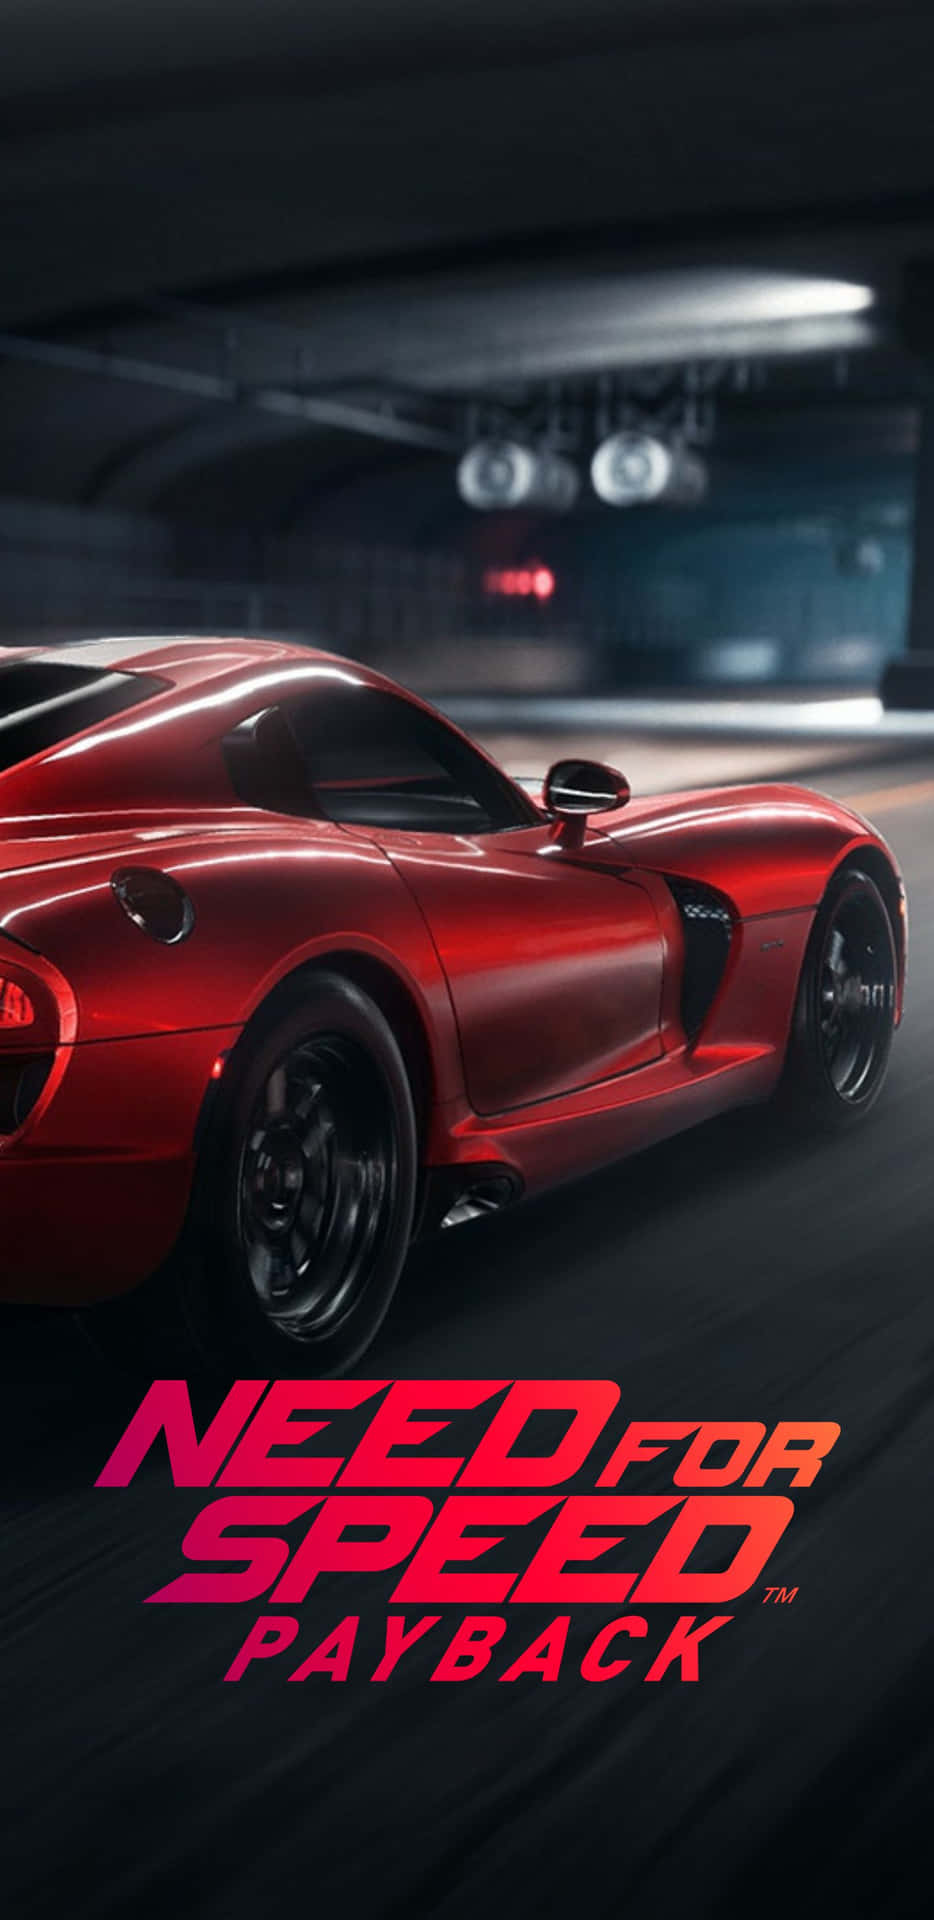 Get ready for a thrilling ride with Need for Speed Payback on Pixel 3xl.